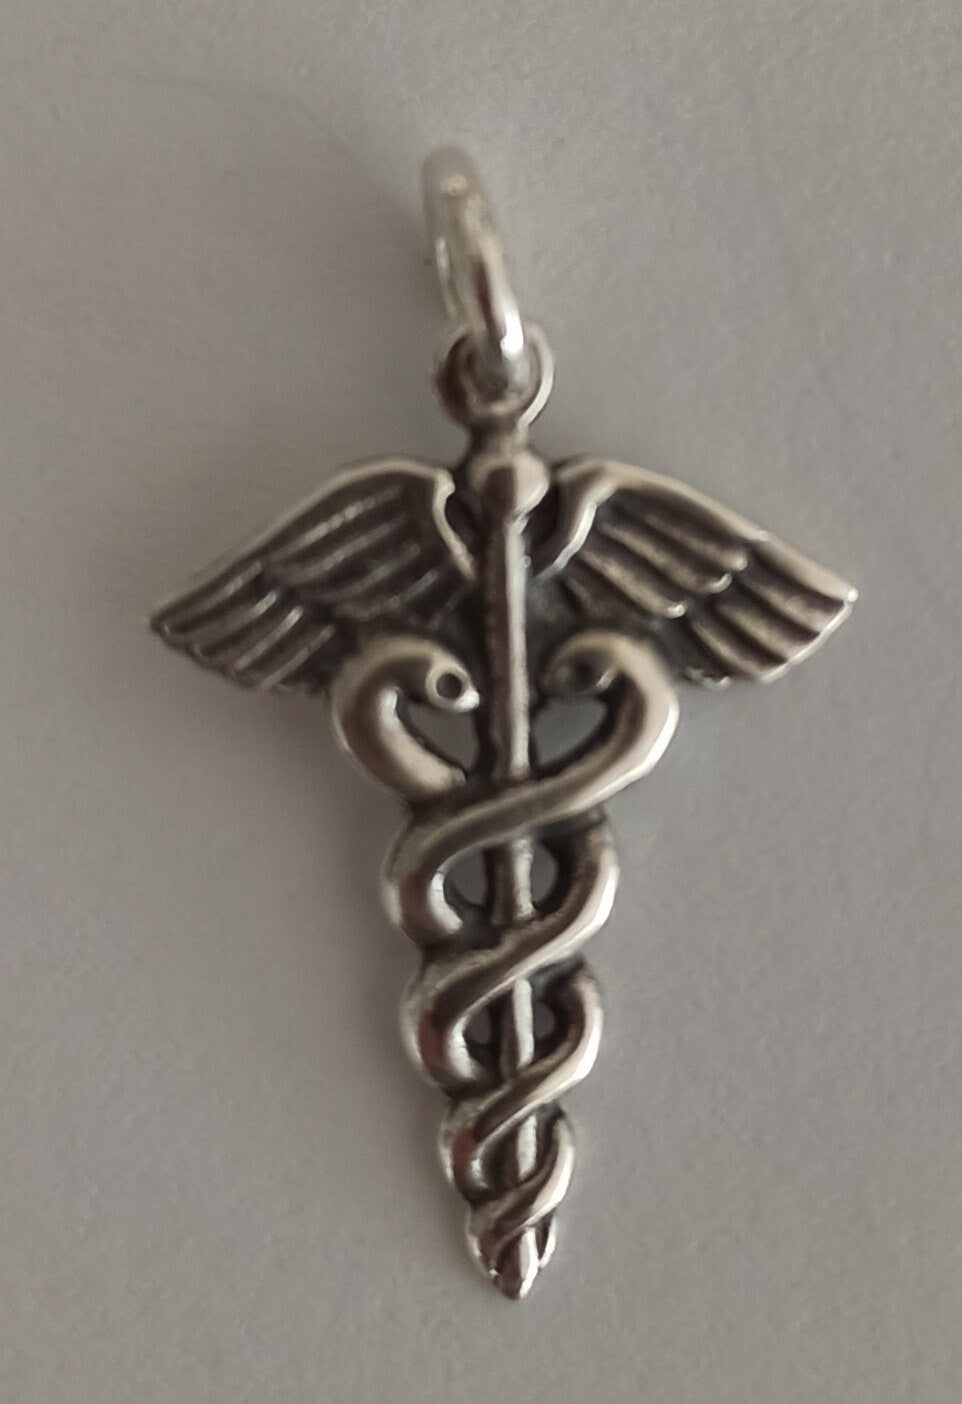 Caduceus - Symbol of God Hermes Mercury - Short Staff entwined by two Serpents, surmounted by Wings - Pendant - 925 Sterling Silver